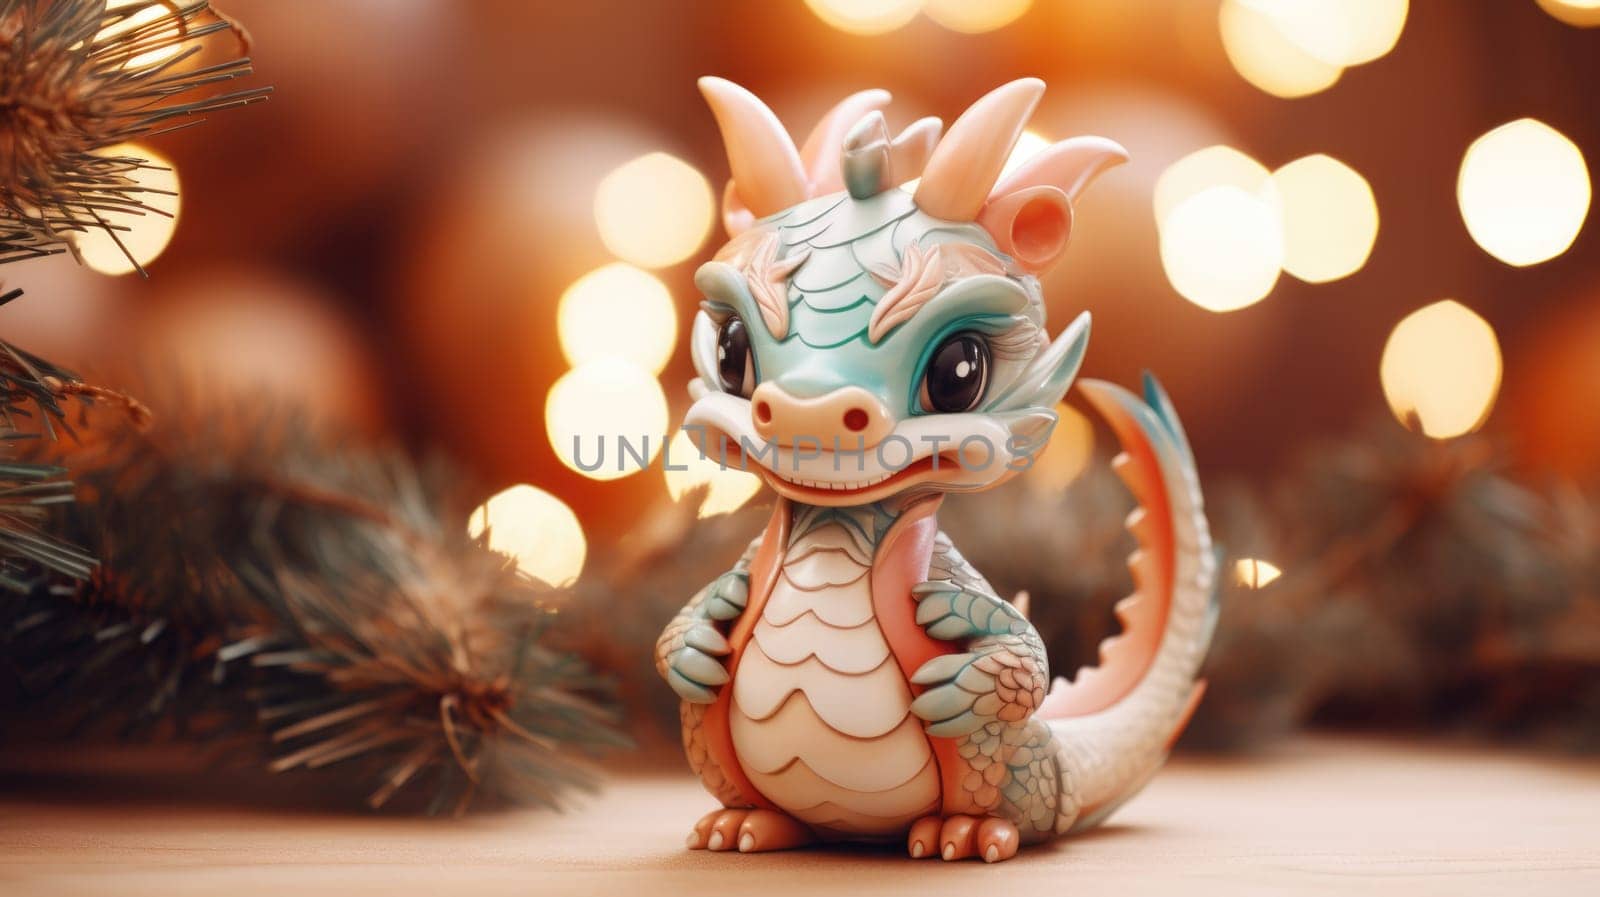 A small figurine of a dragon sitting on a table